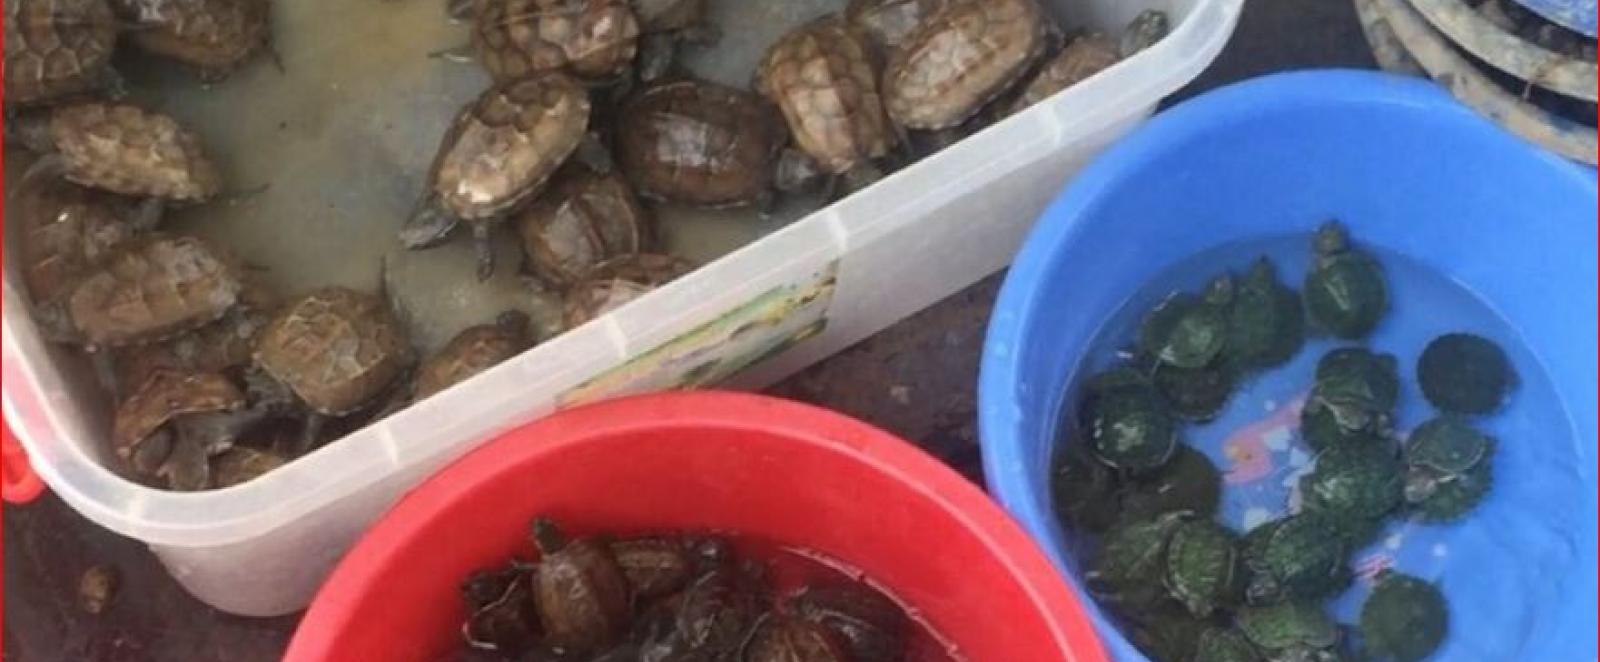 trafficked turtles being sold in tubs